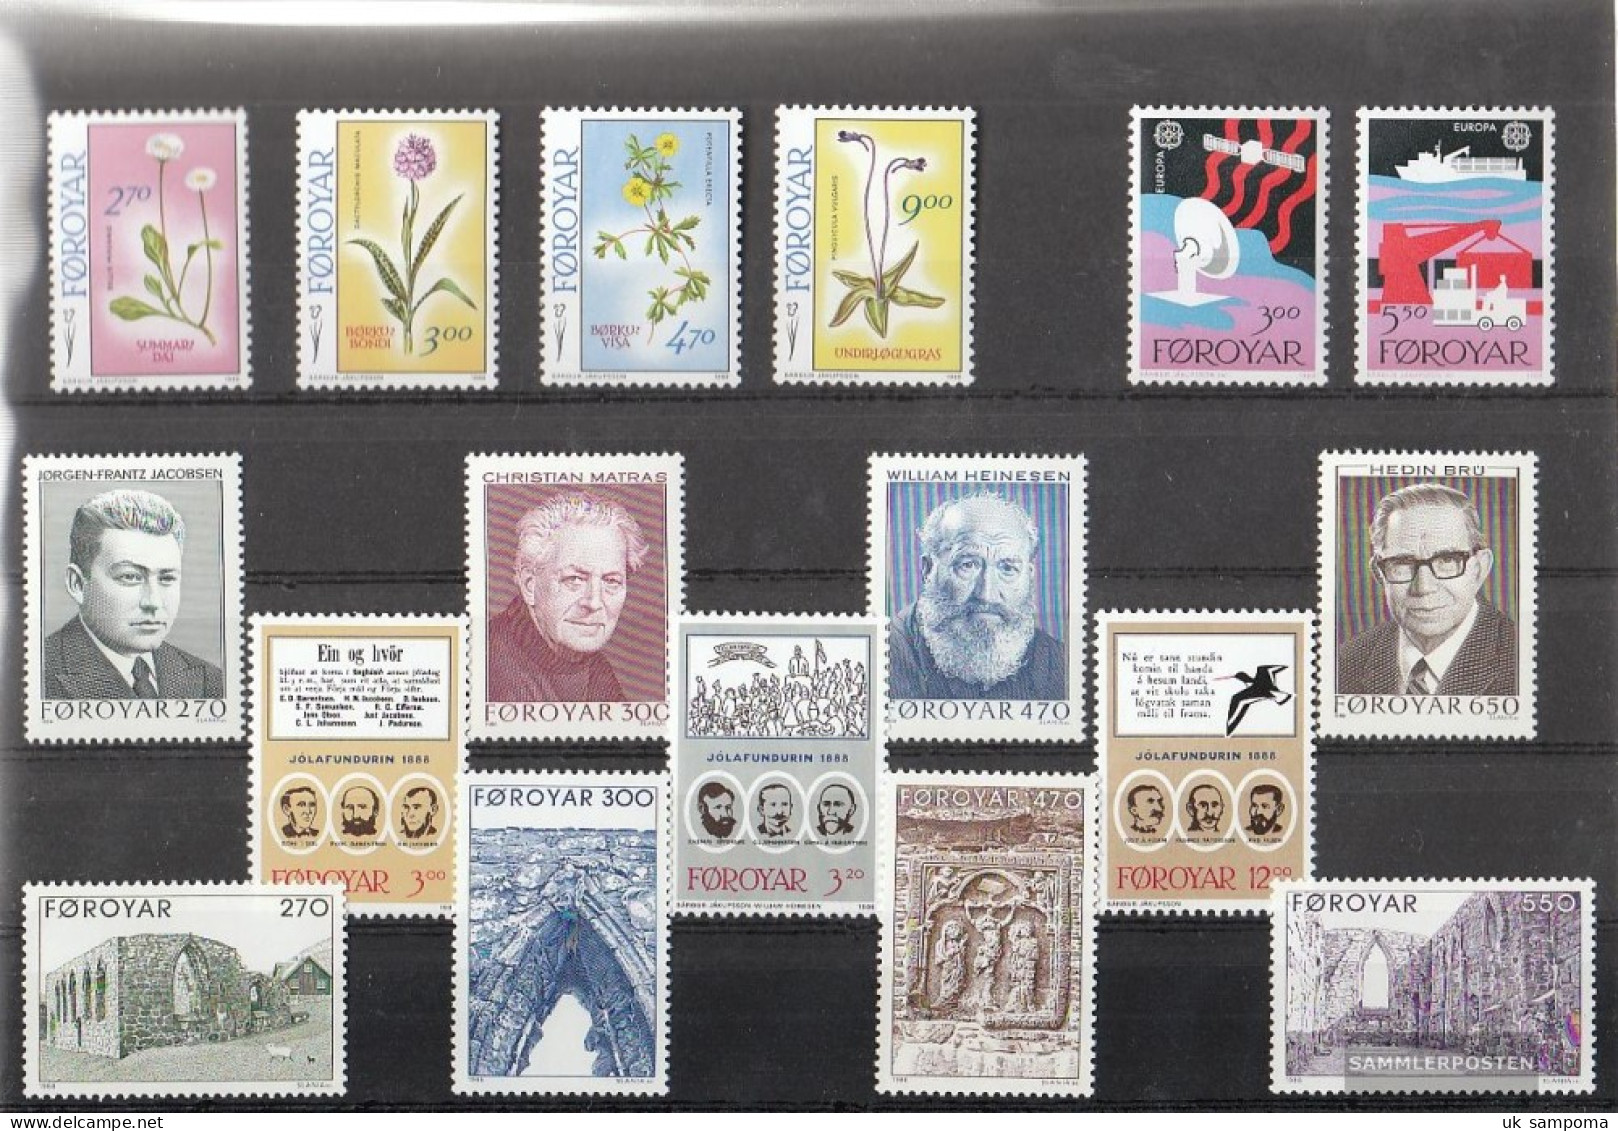 Denmark - Faroe Islands Unmounted Mint / Never Hinged 1988 Complete Volume In Clean Conservation - Años Completos